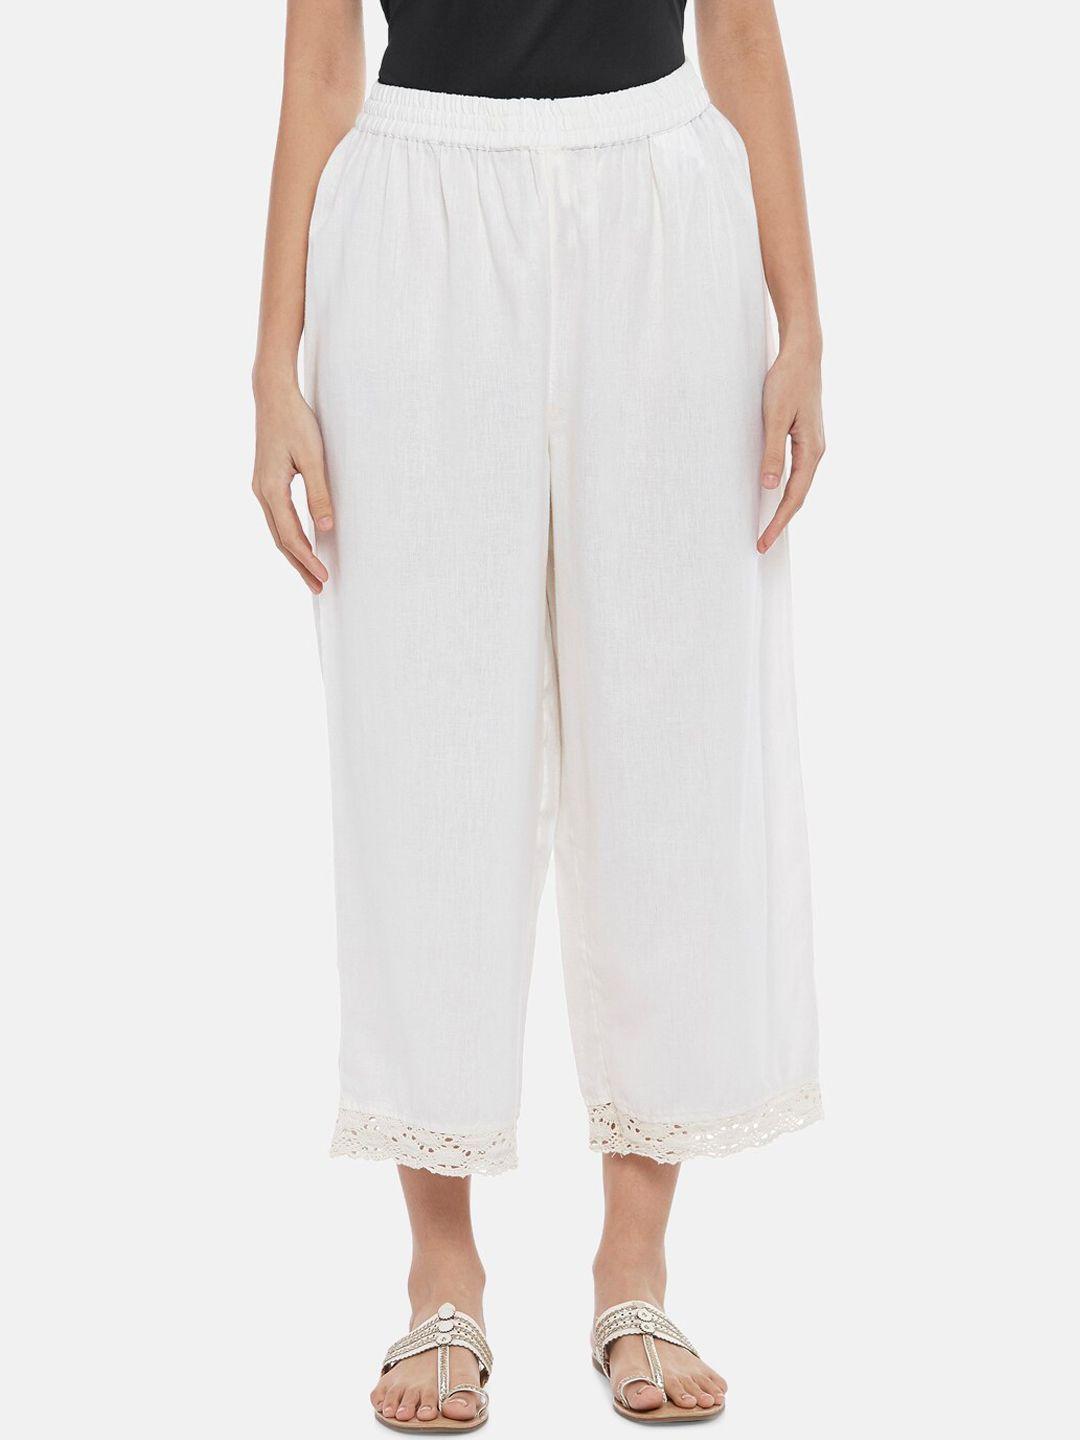 RANGMANCH BY PANTALOONS Women Off White Culottes Trousers